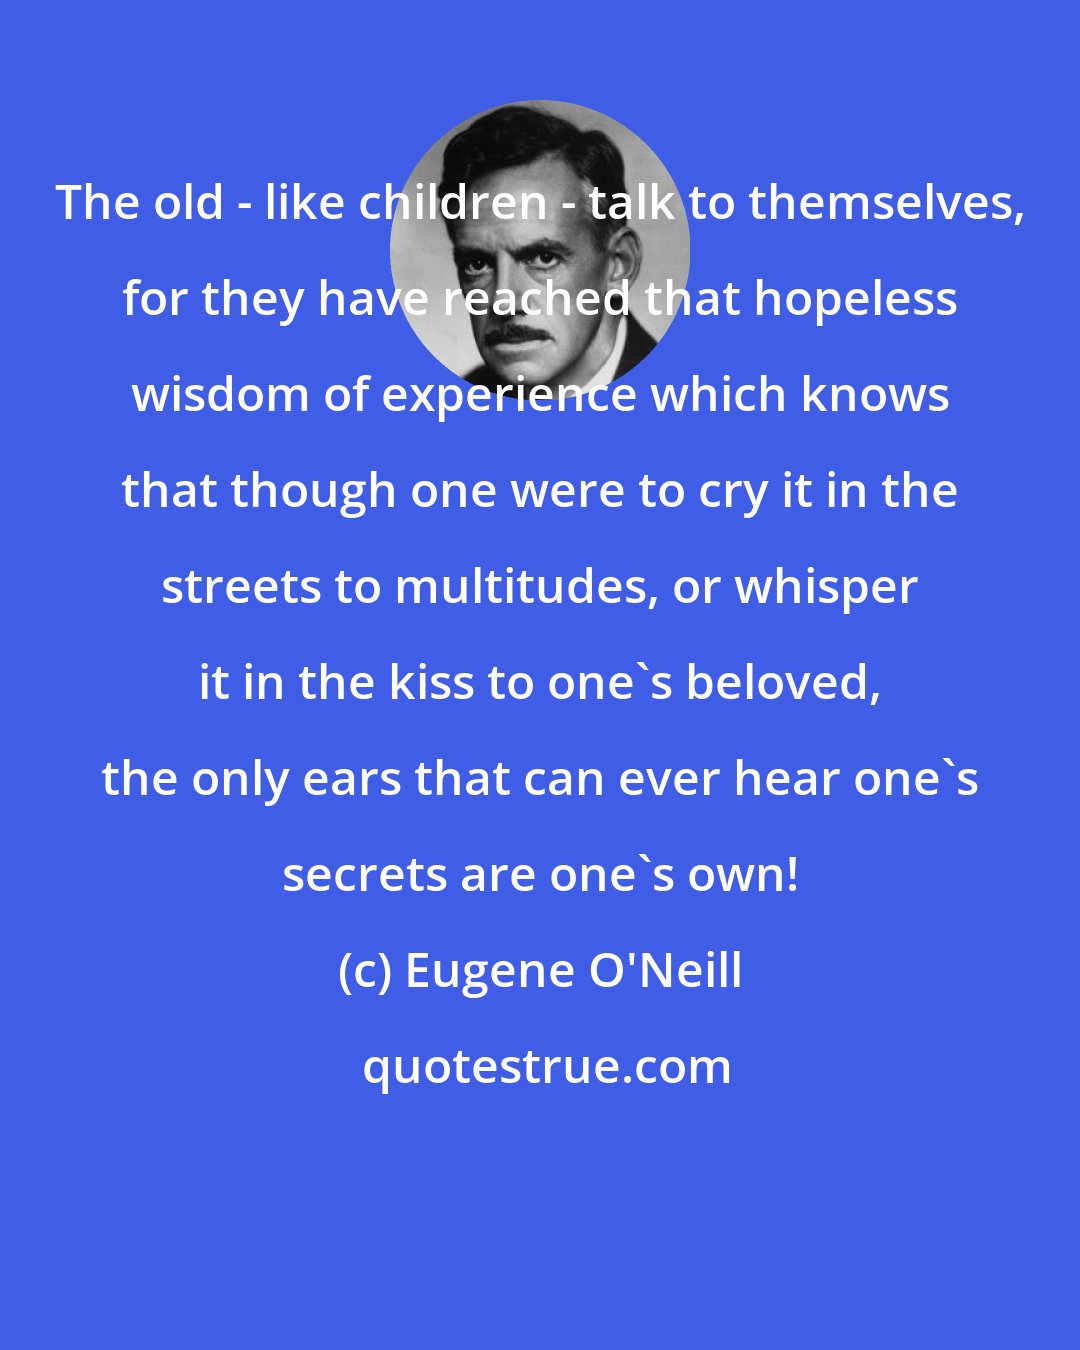 Eugene O'Neill: The old - like children - talk to themselves, for they have reached that hopeless wisdom of experience which knows that though one were to cry it in the streets to multitudes, or whisper it in the kiss to one's beloved, the only ears that can ever hear one's secrets are one's own!